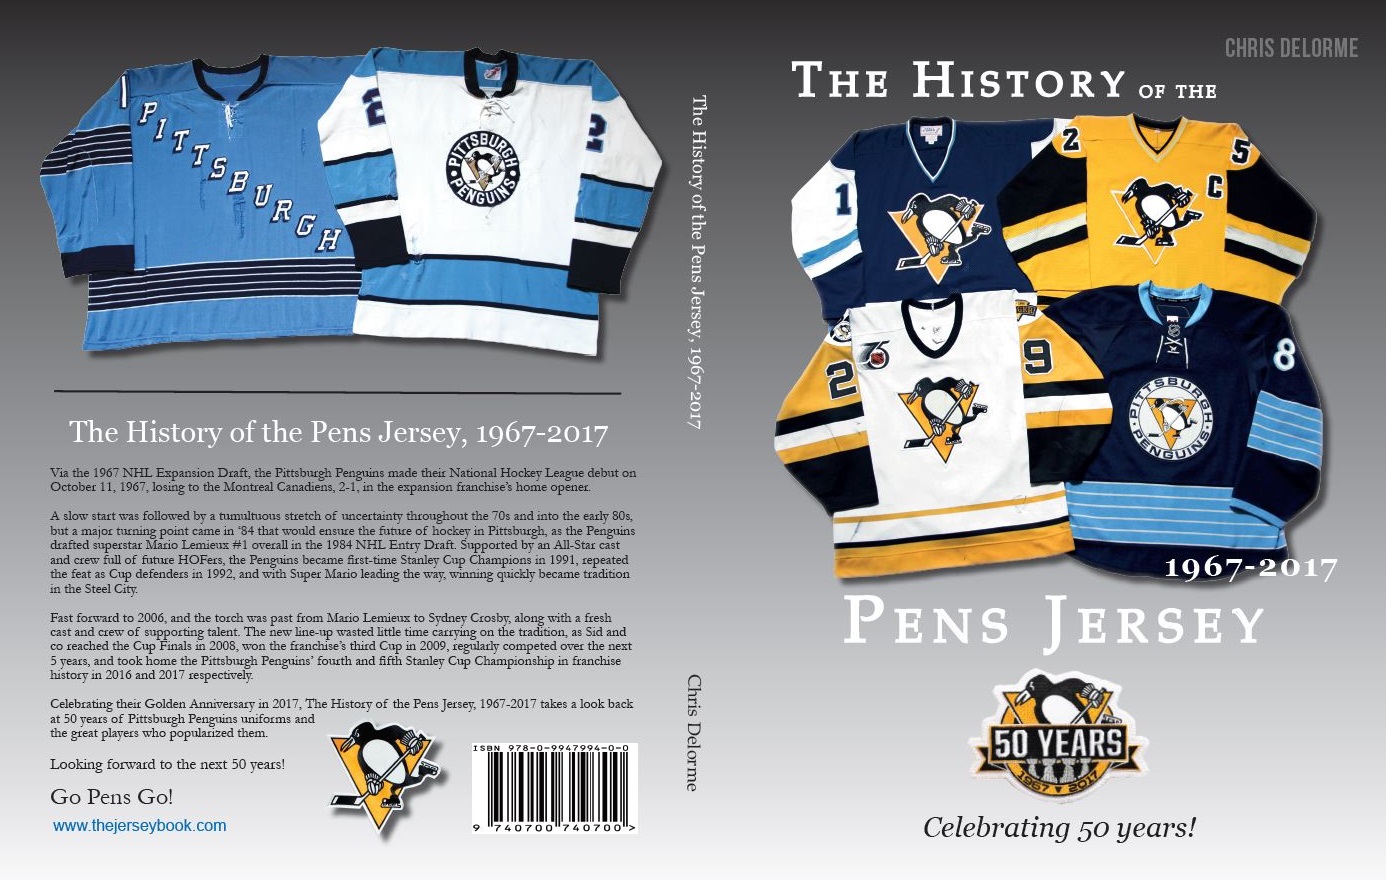 penguins jerseys through the years